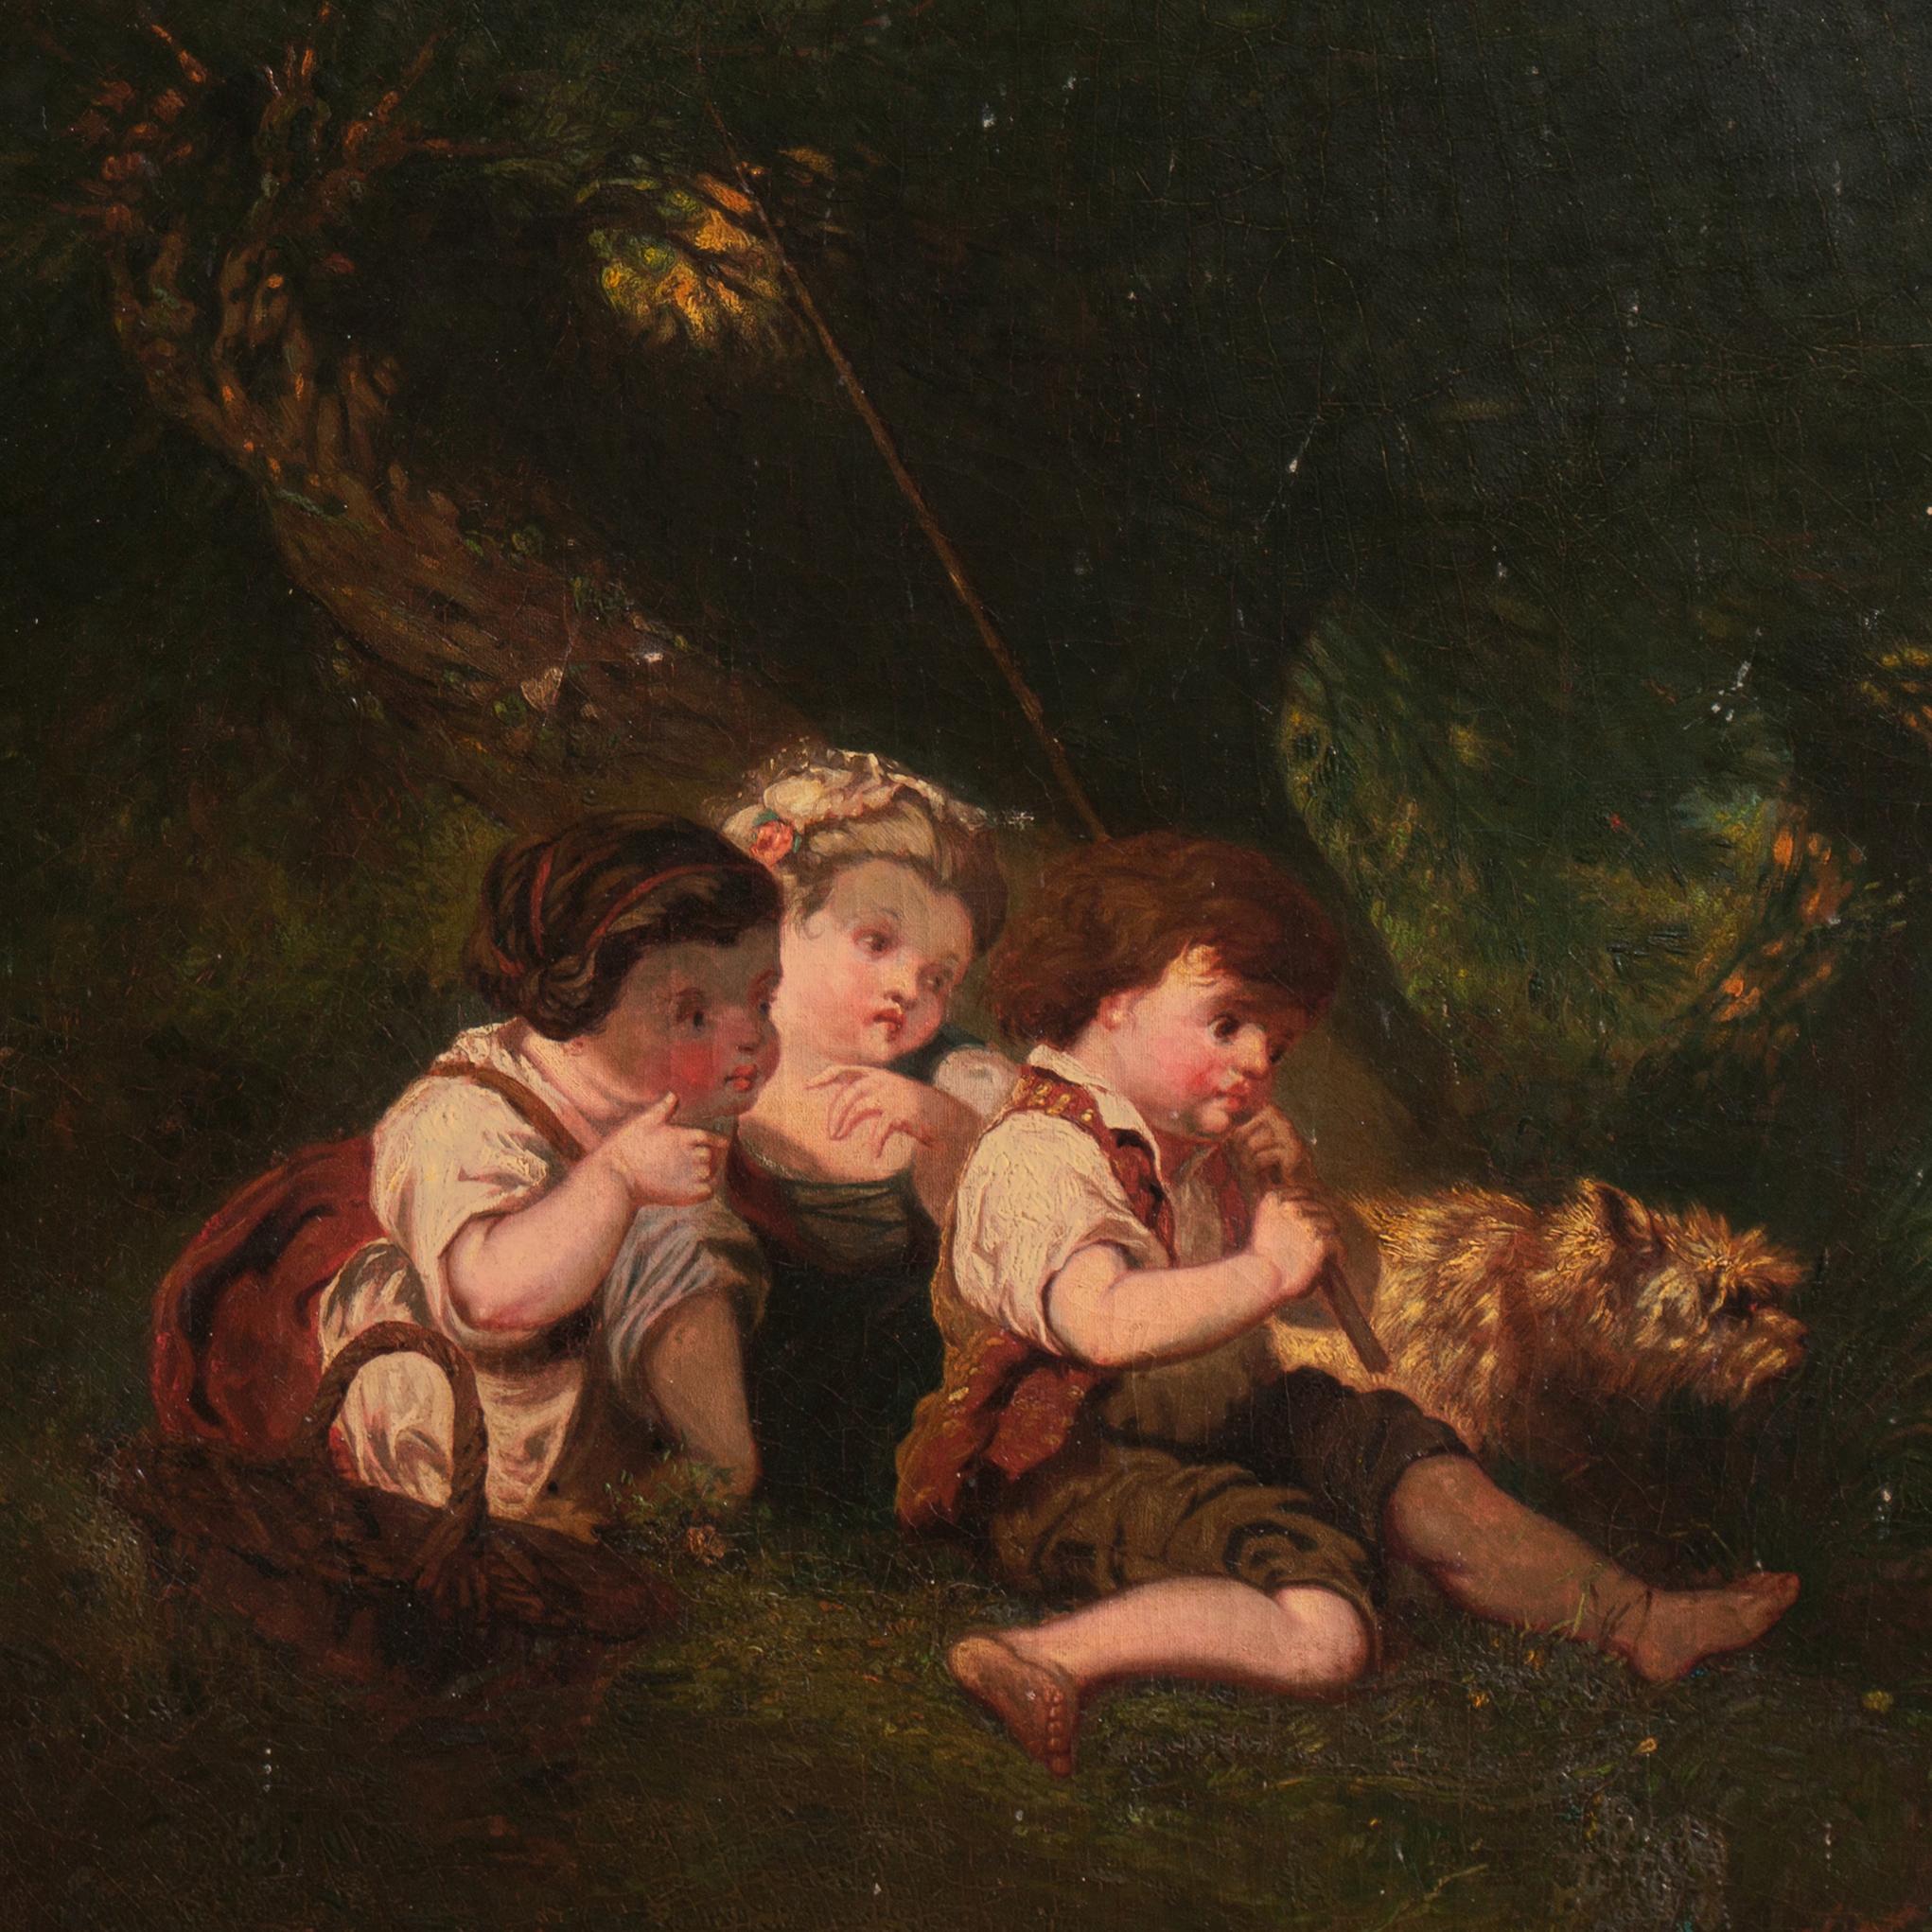 'Children Landing a Catfish', 19th Century American School, Large Nocturnal Oil - Painting by American School, 19th Century